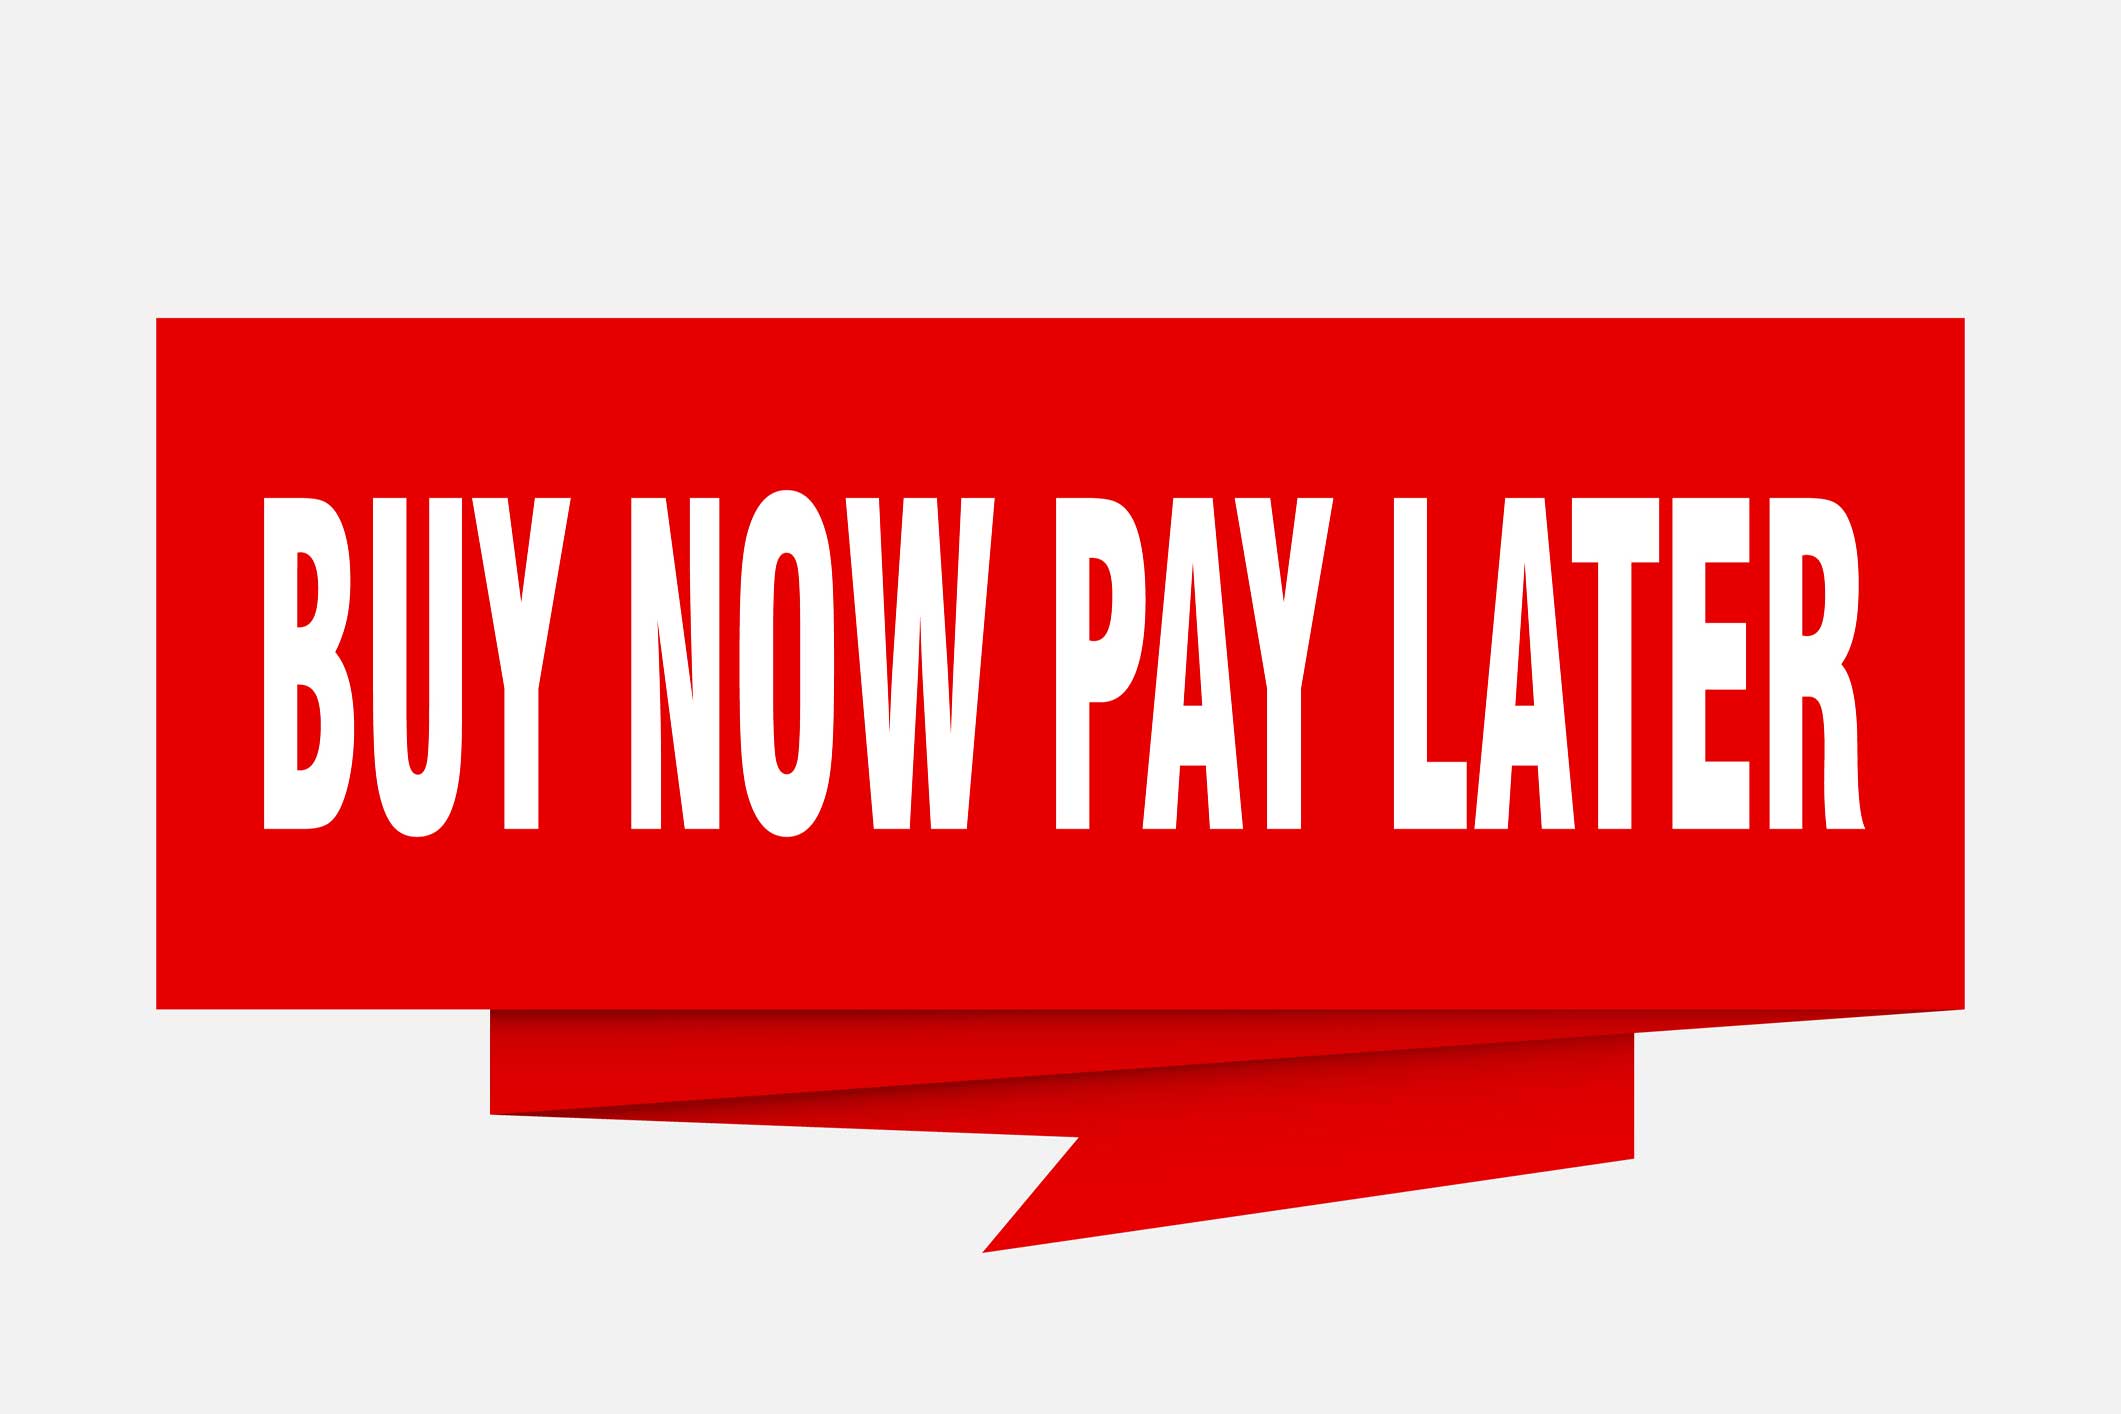 The words BUY NOW PAY LATER shown on a vibrant red banner